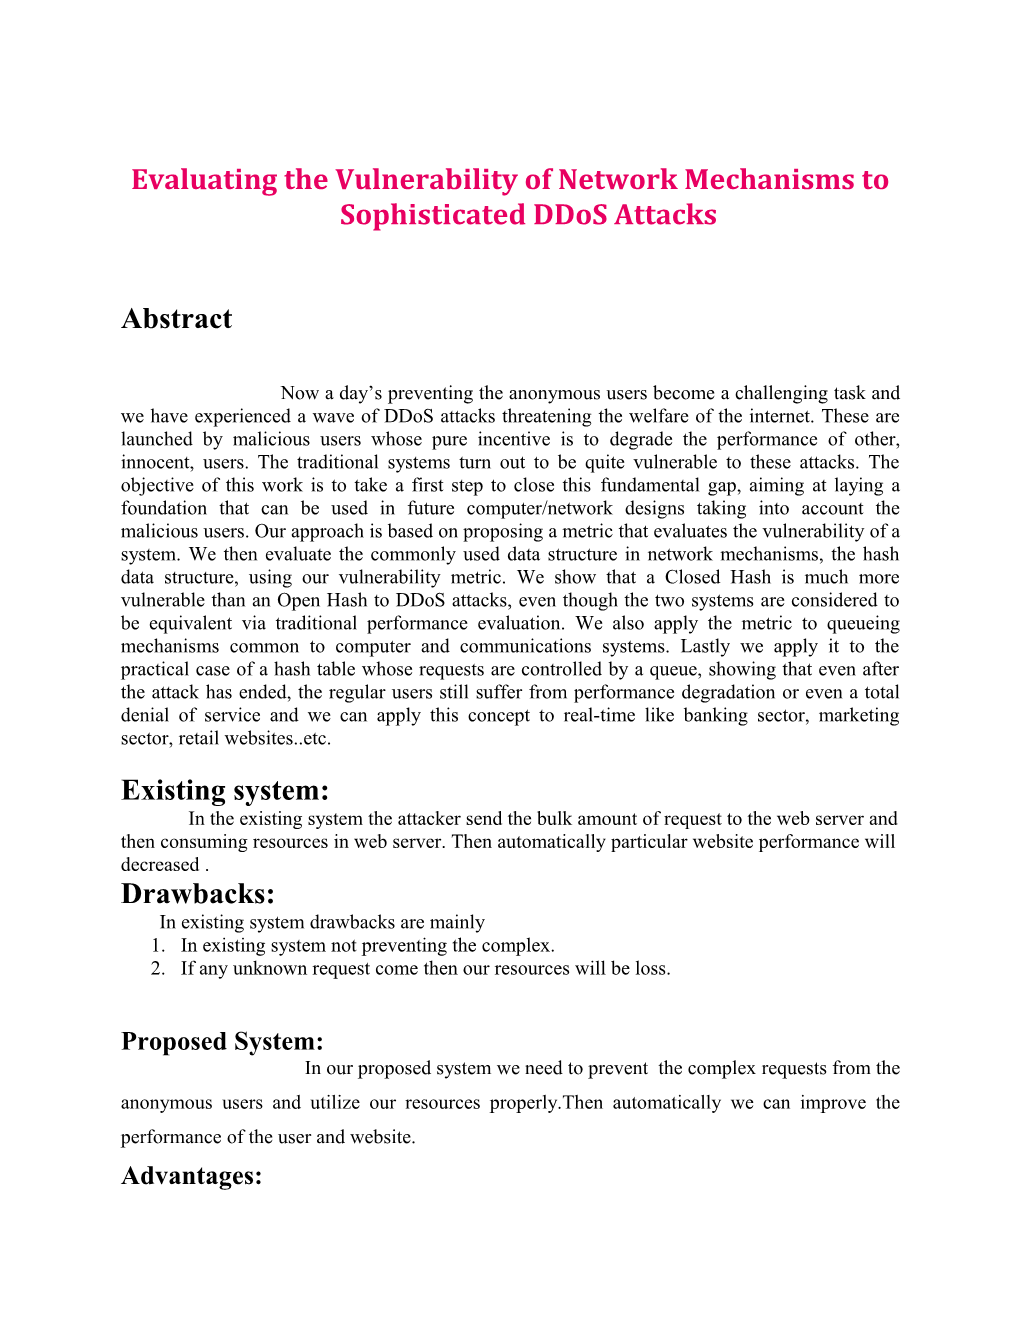 Evaluating the Vulnerability of Network Mechanisms to Sophisticated Ddos Attacks